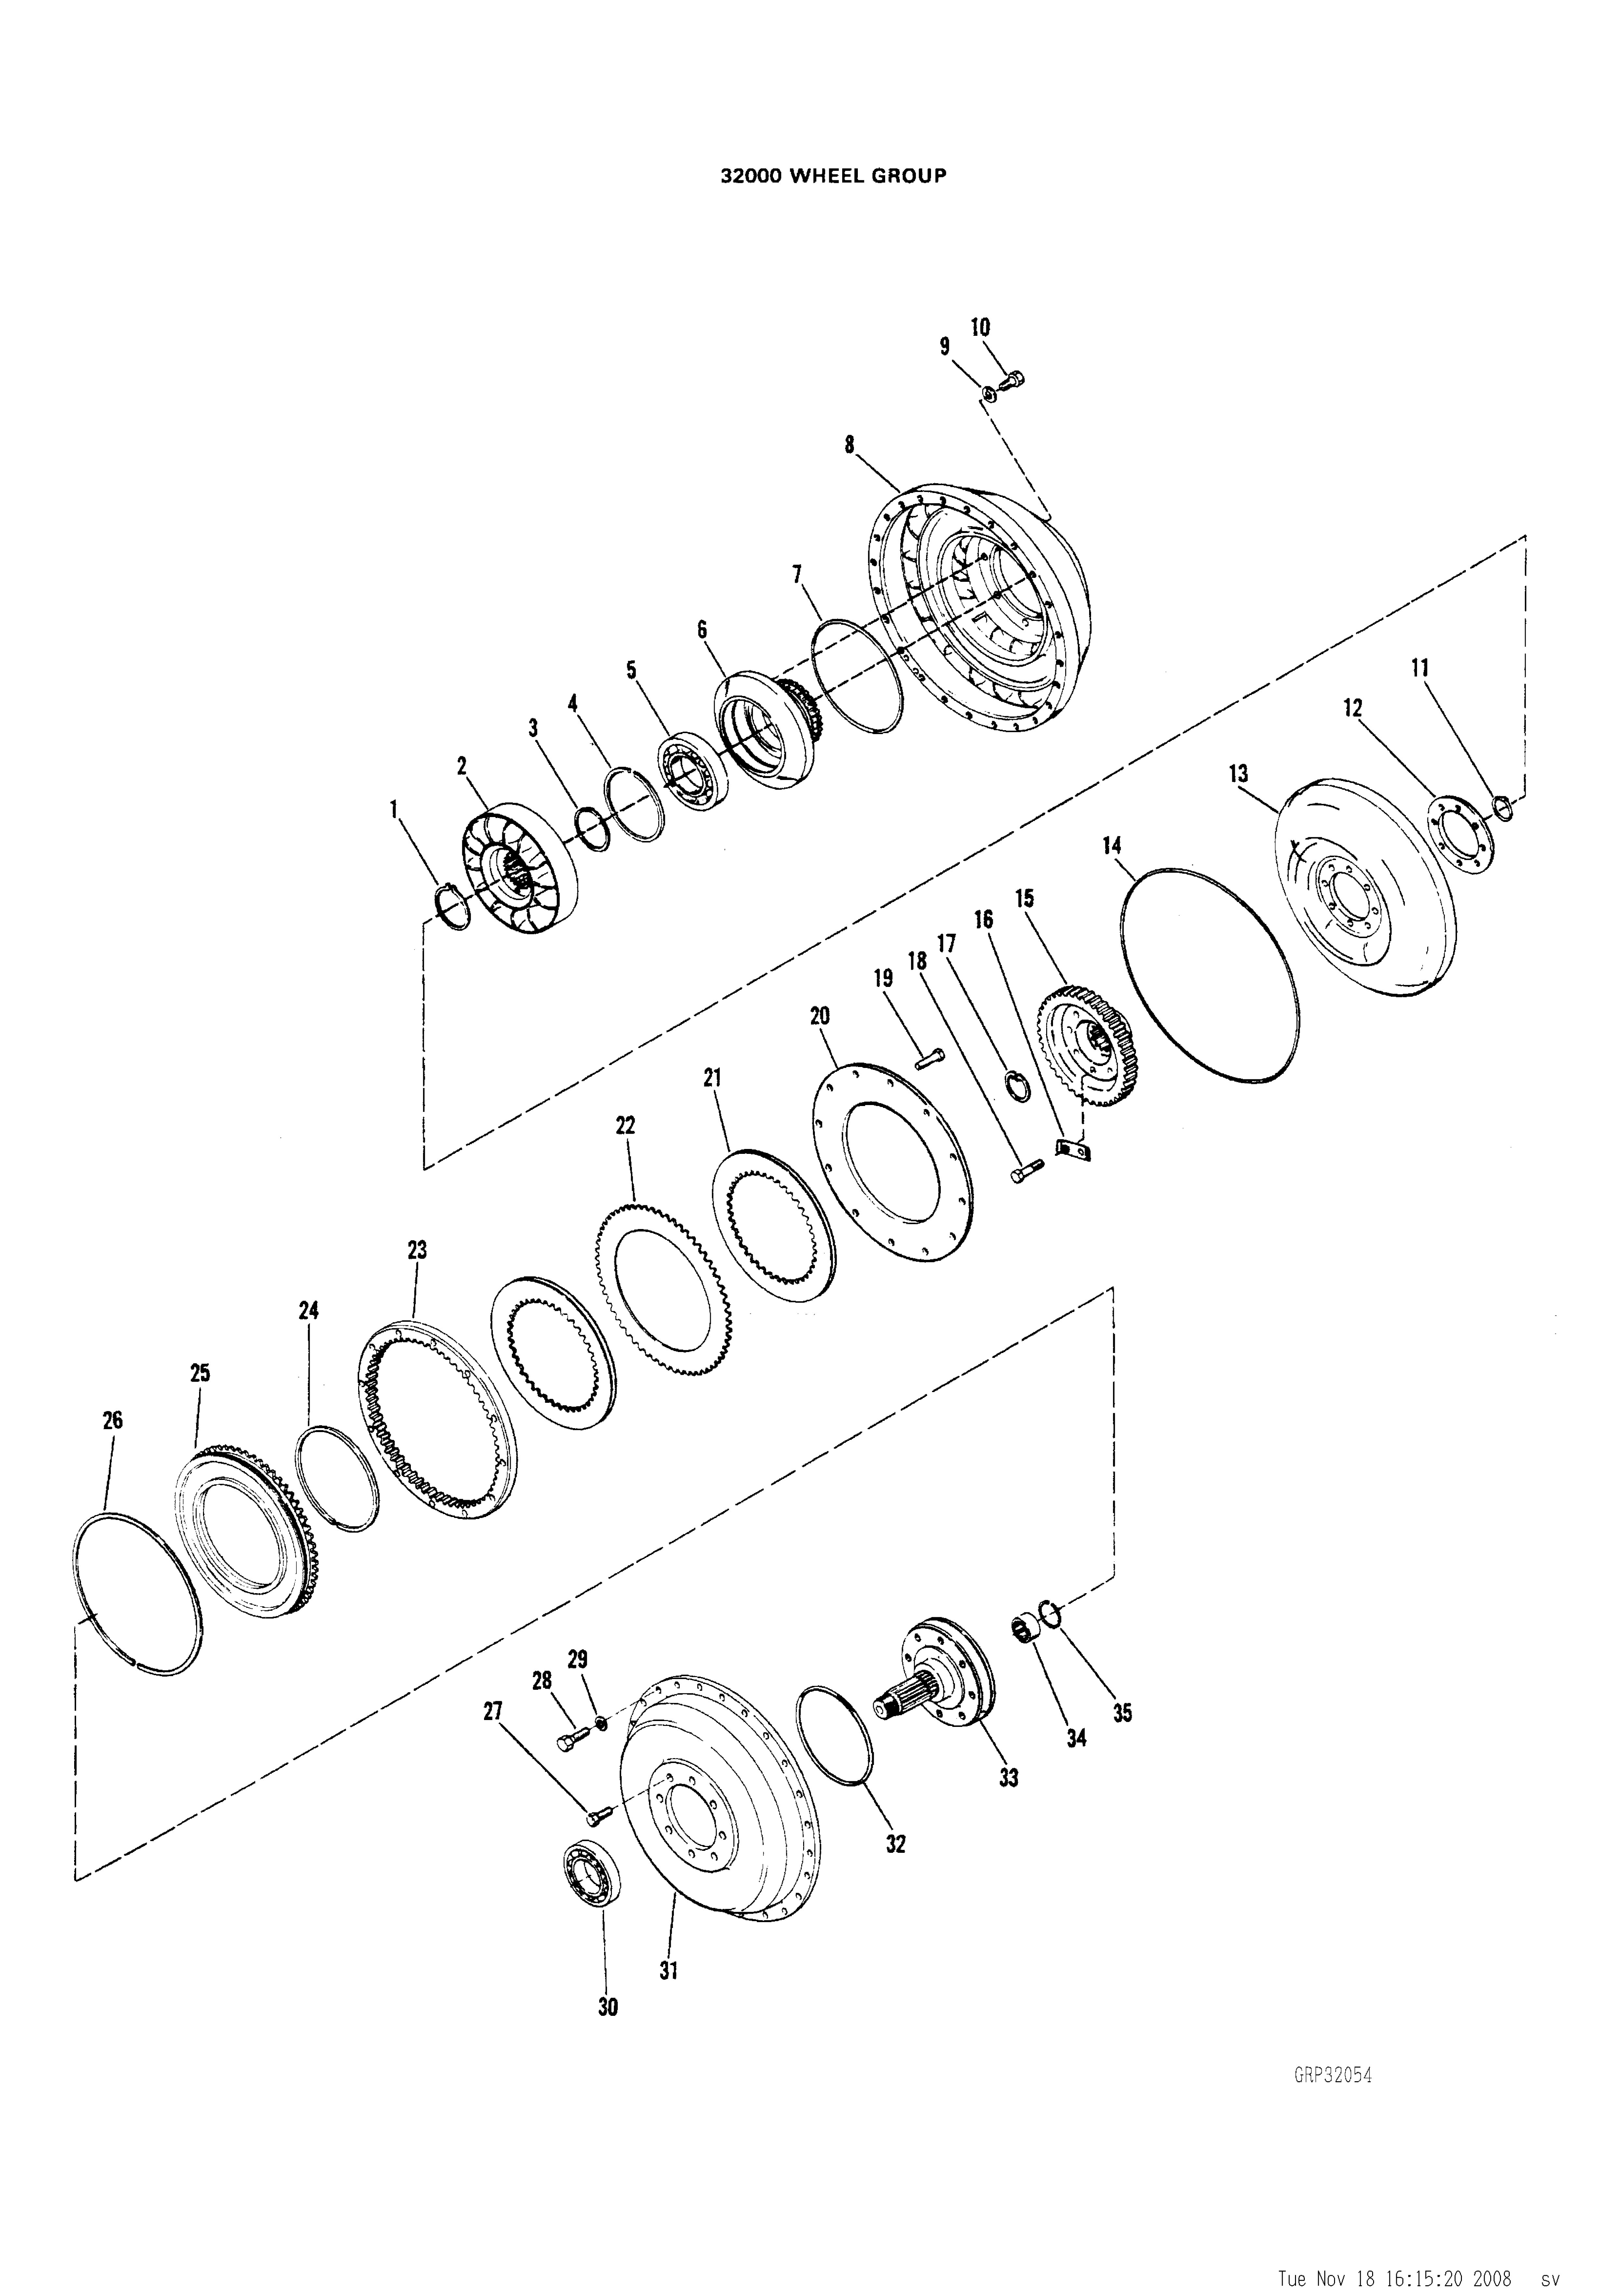 drawing for TELEDYNE SPECIALITY EQUIPMENT 1004604 - RING (figure 3)